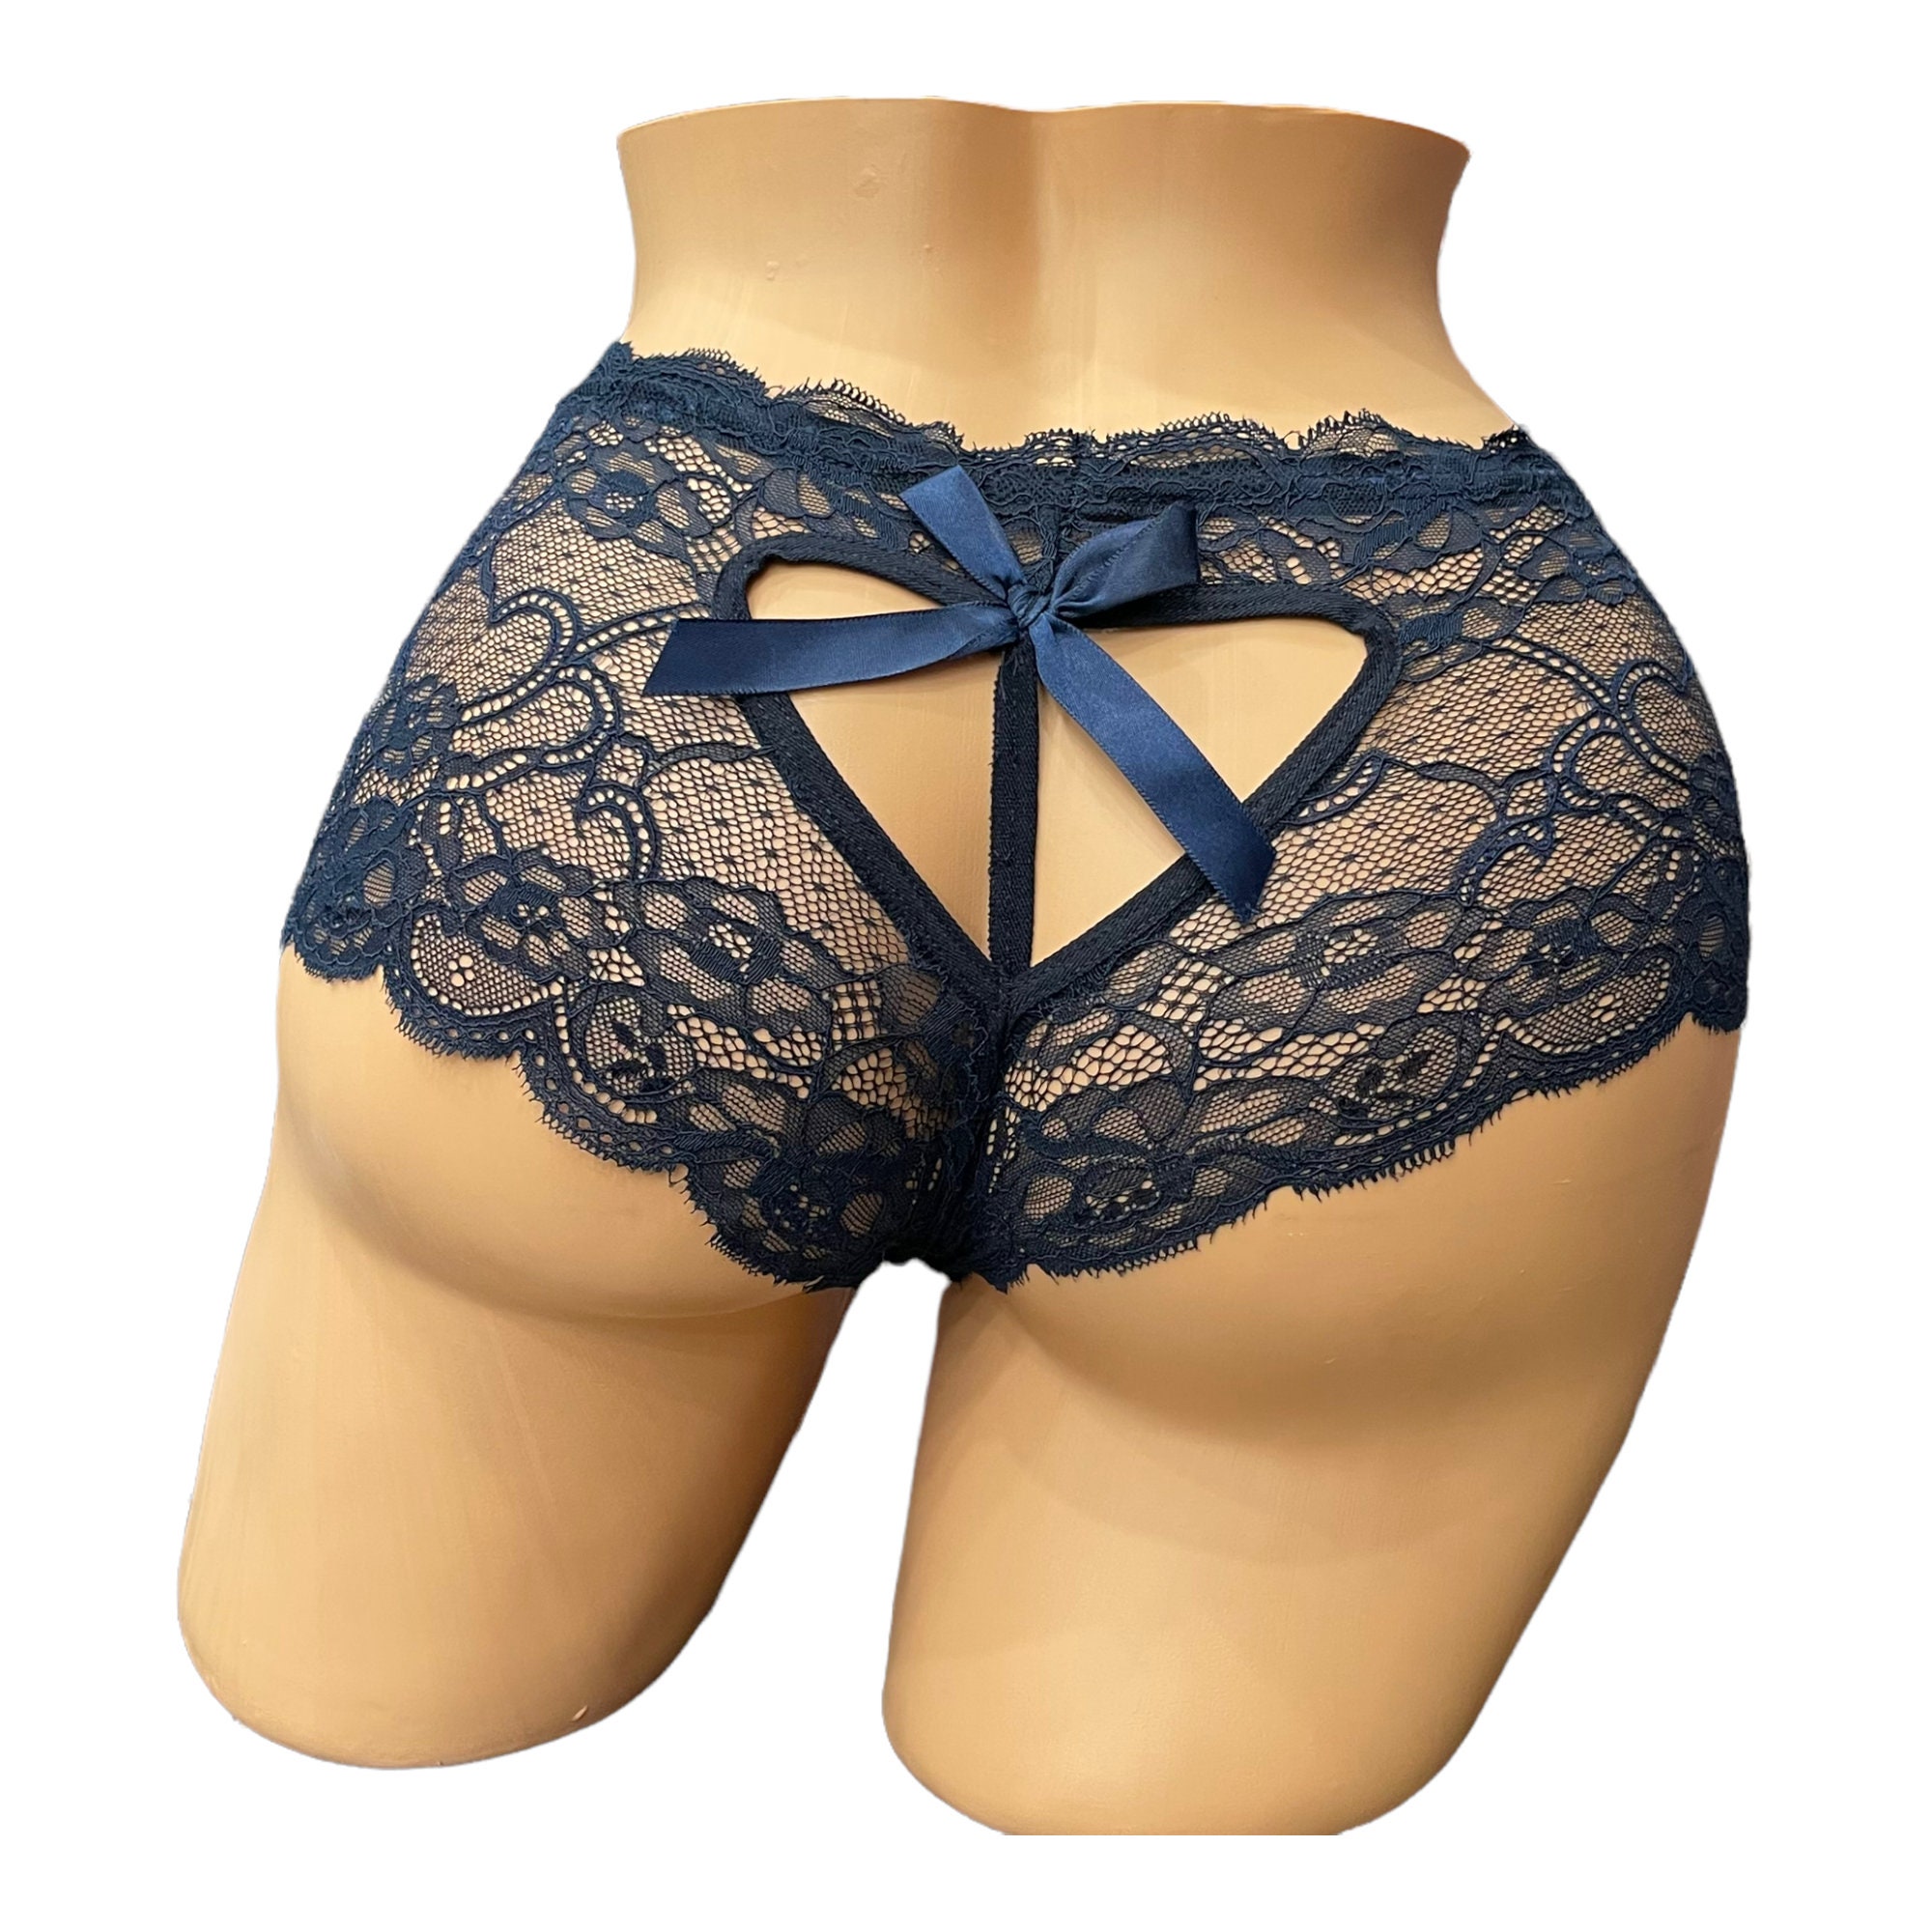  Sexy Lace G-String Thongs for Women Naughty See Through Strappy  Floral Lace Tangas Lingerie Soft Stretch Low Rise Bowknot Knickers,Panties  For Women,Women'S Panties,Panties Black : Clothing, Shoes & Jewelry